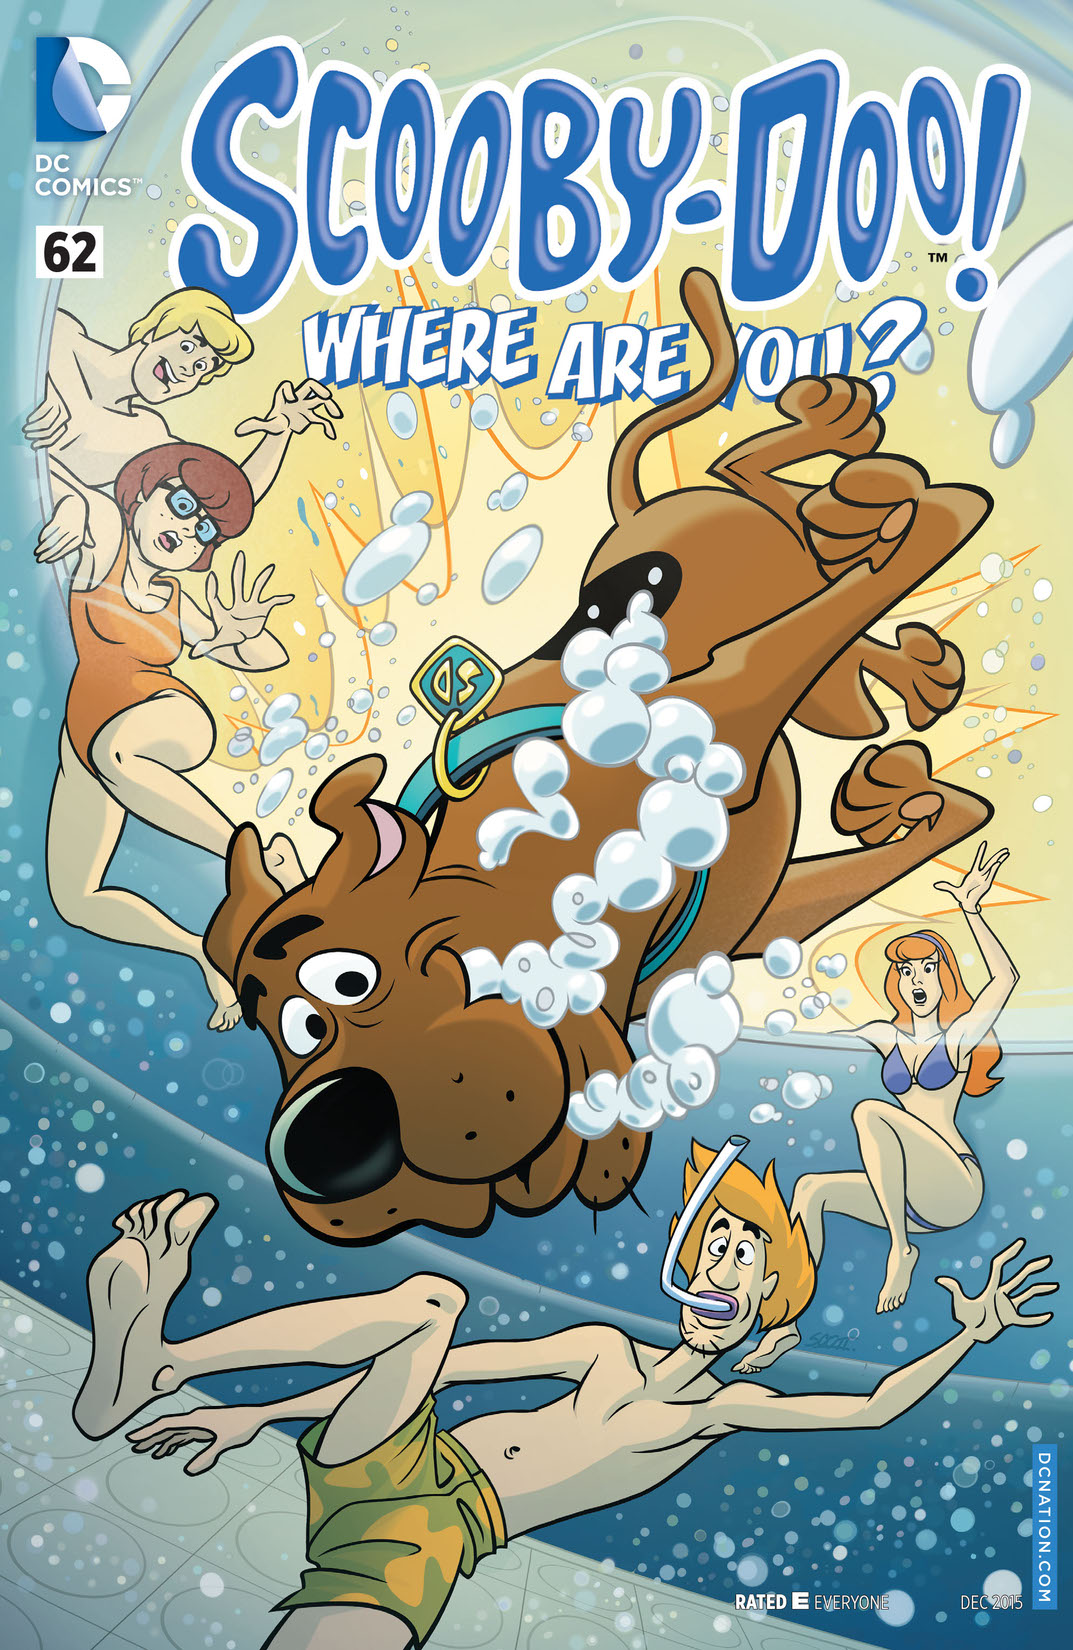 Scooby-Doo, Where Are You? #62 preview images